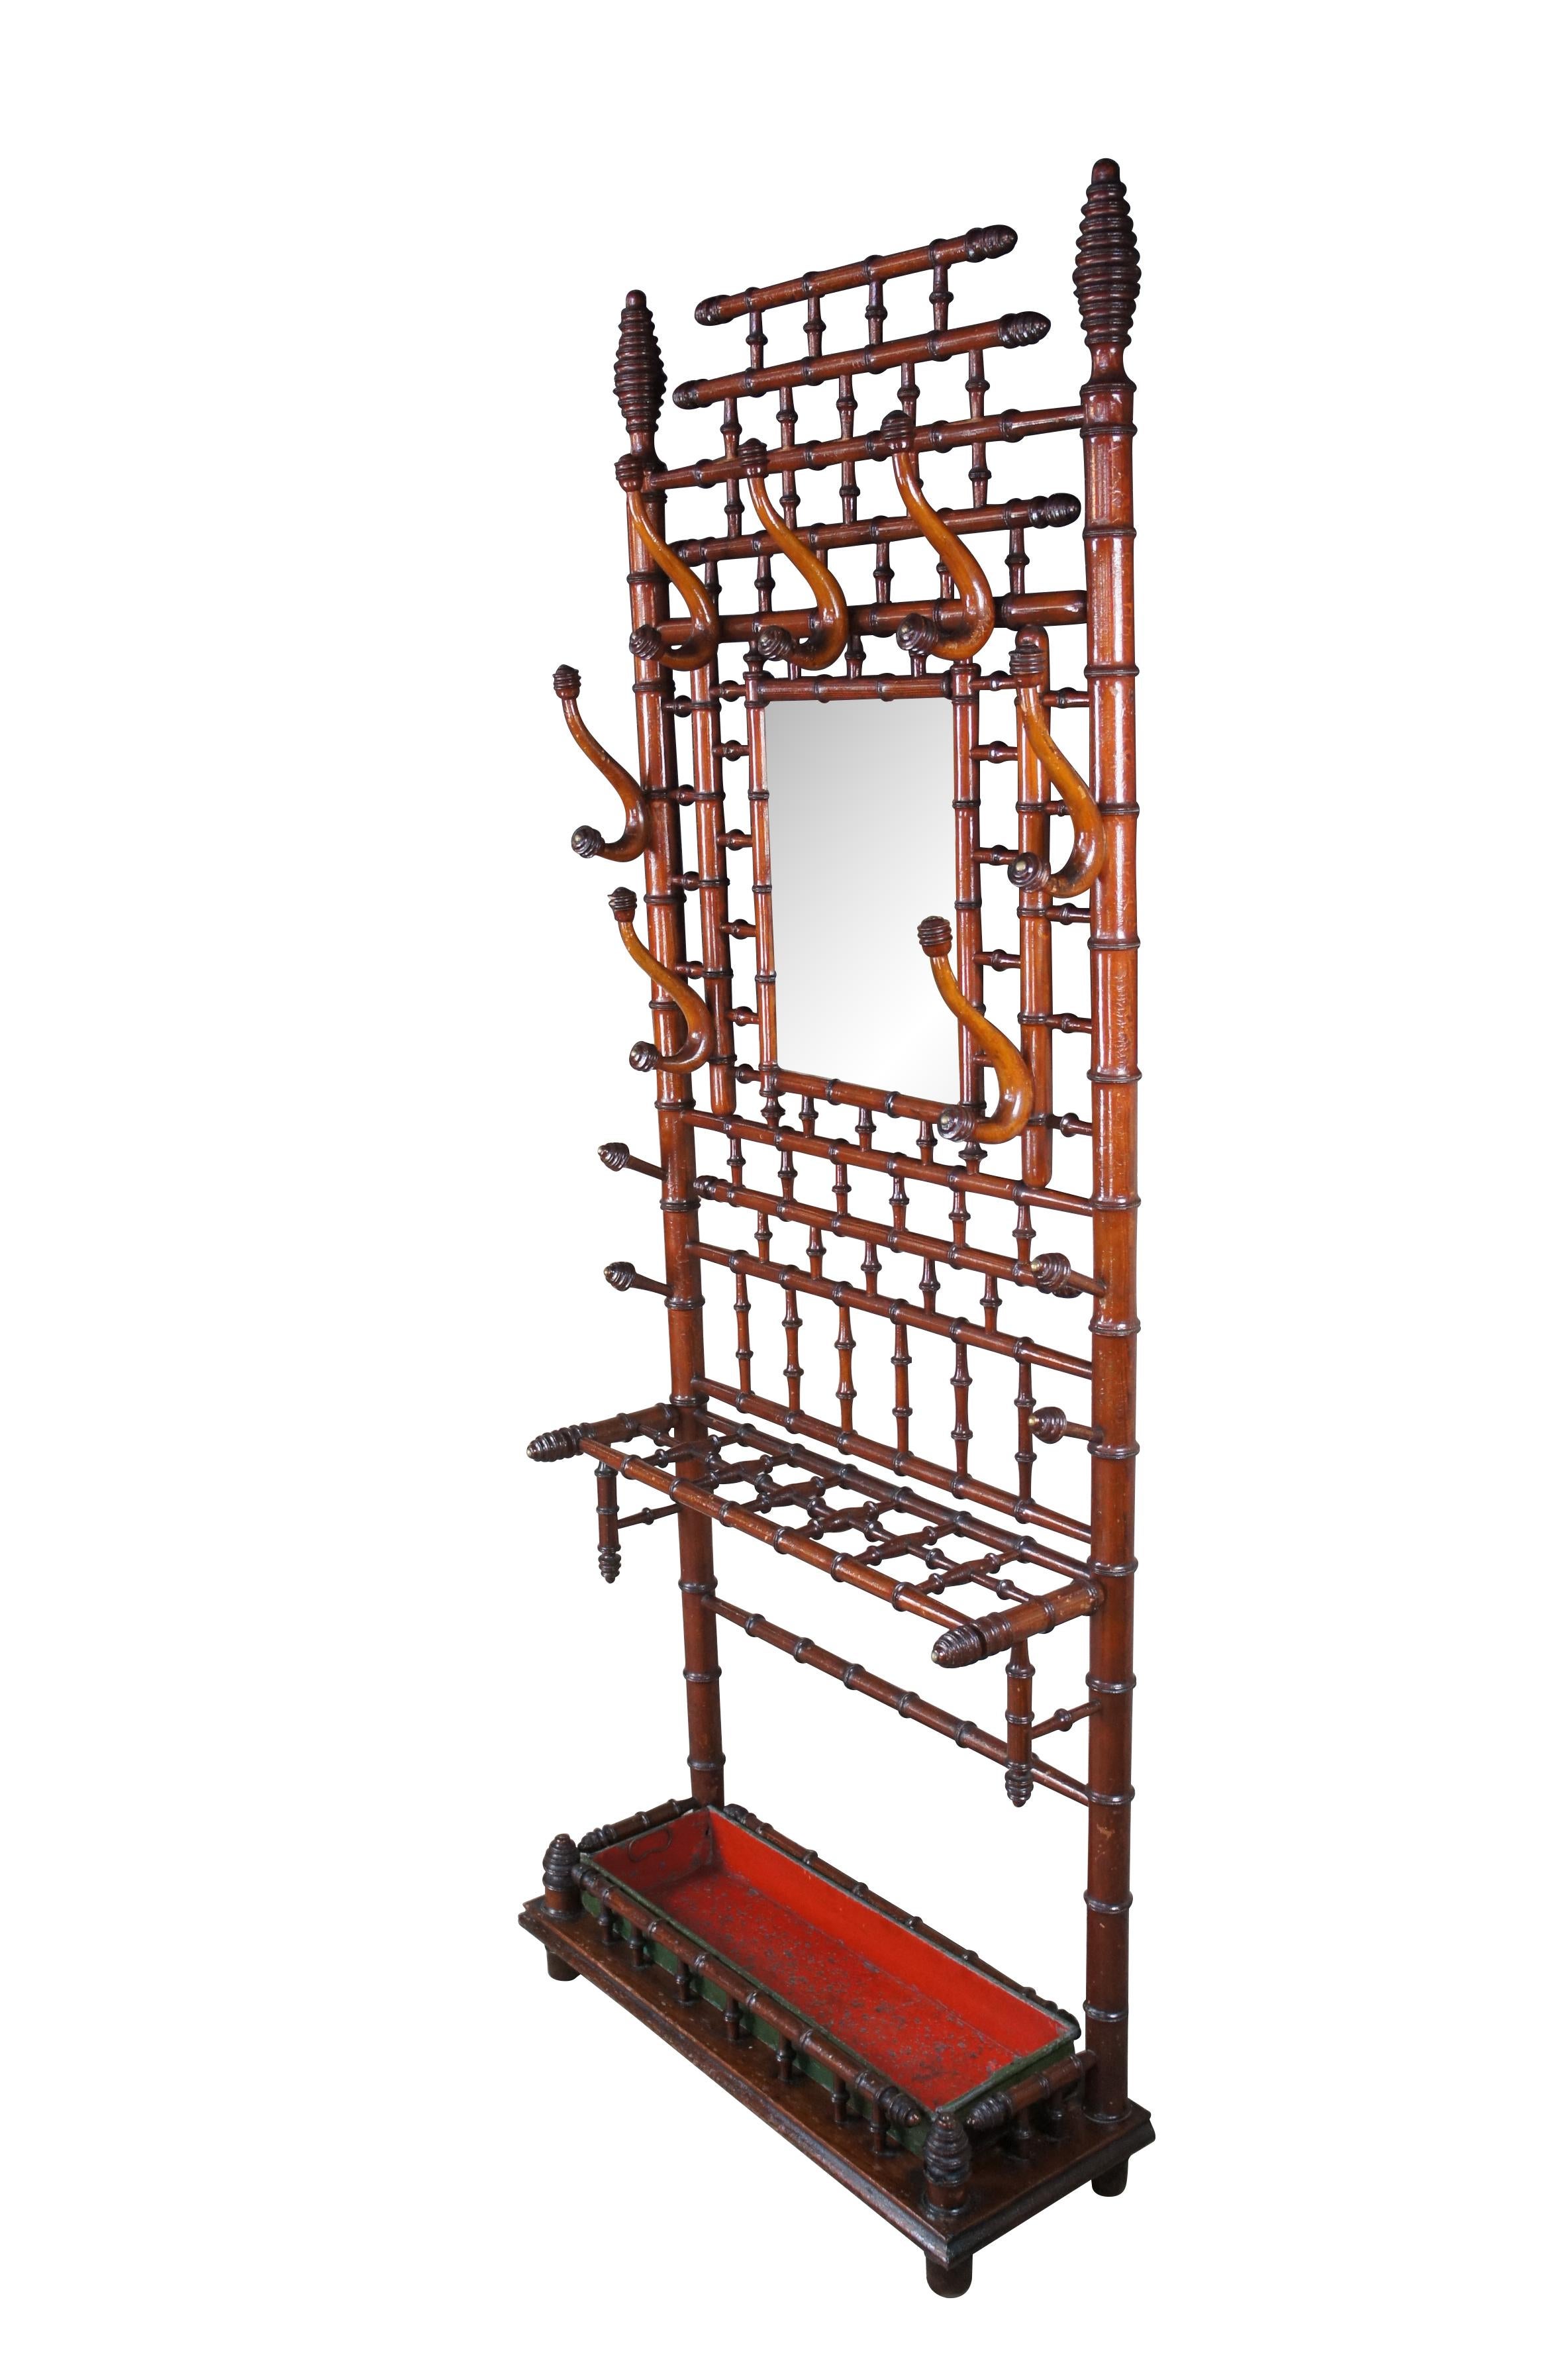 Antique French Victorian Faux Bamboo Hall Tree Coat Rack Umbrella Stand Mirror In Good Condition For Sale In Dayton, OH